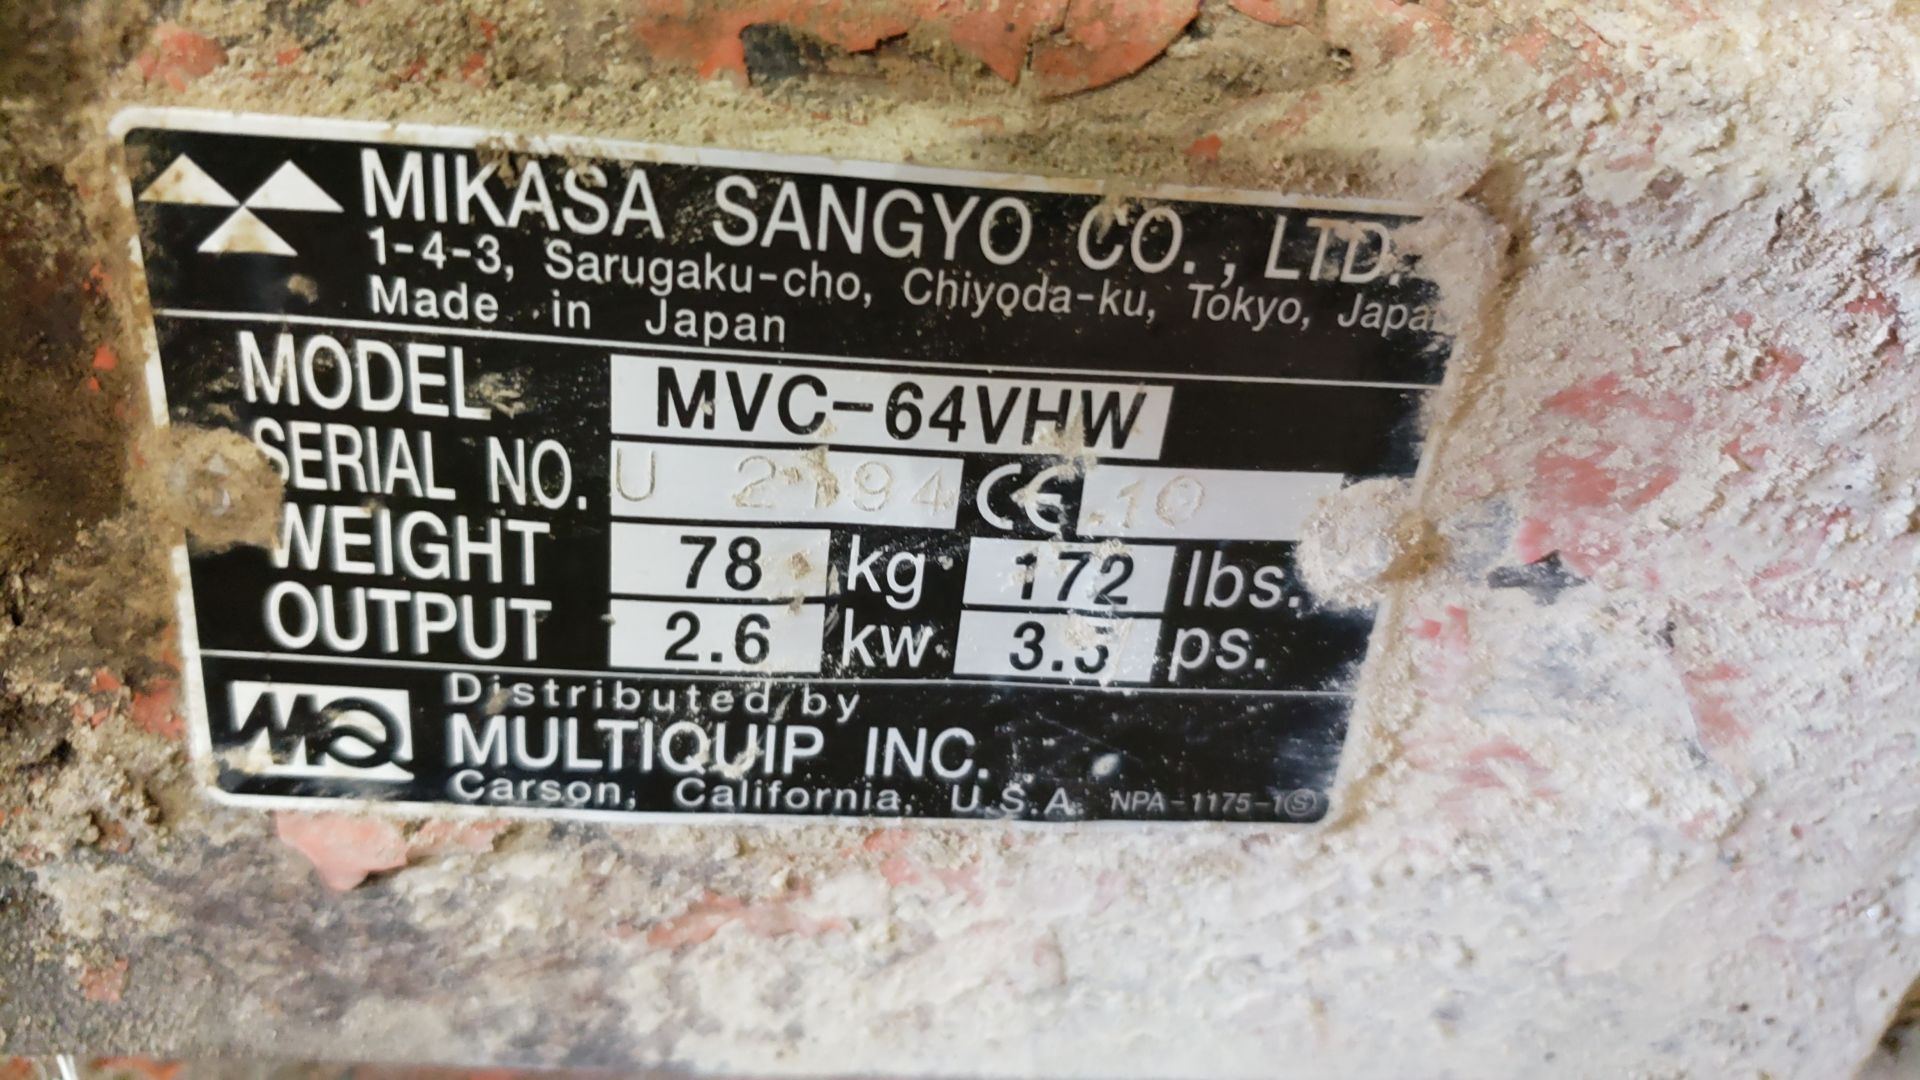 Multiquip-Mikasa MVC64VHW Plate Compactor - Image 3 of 4